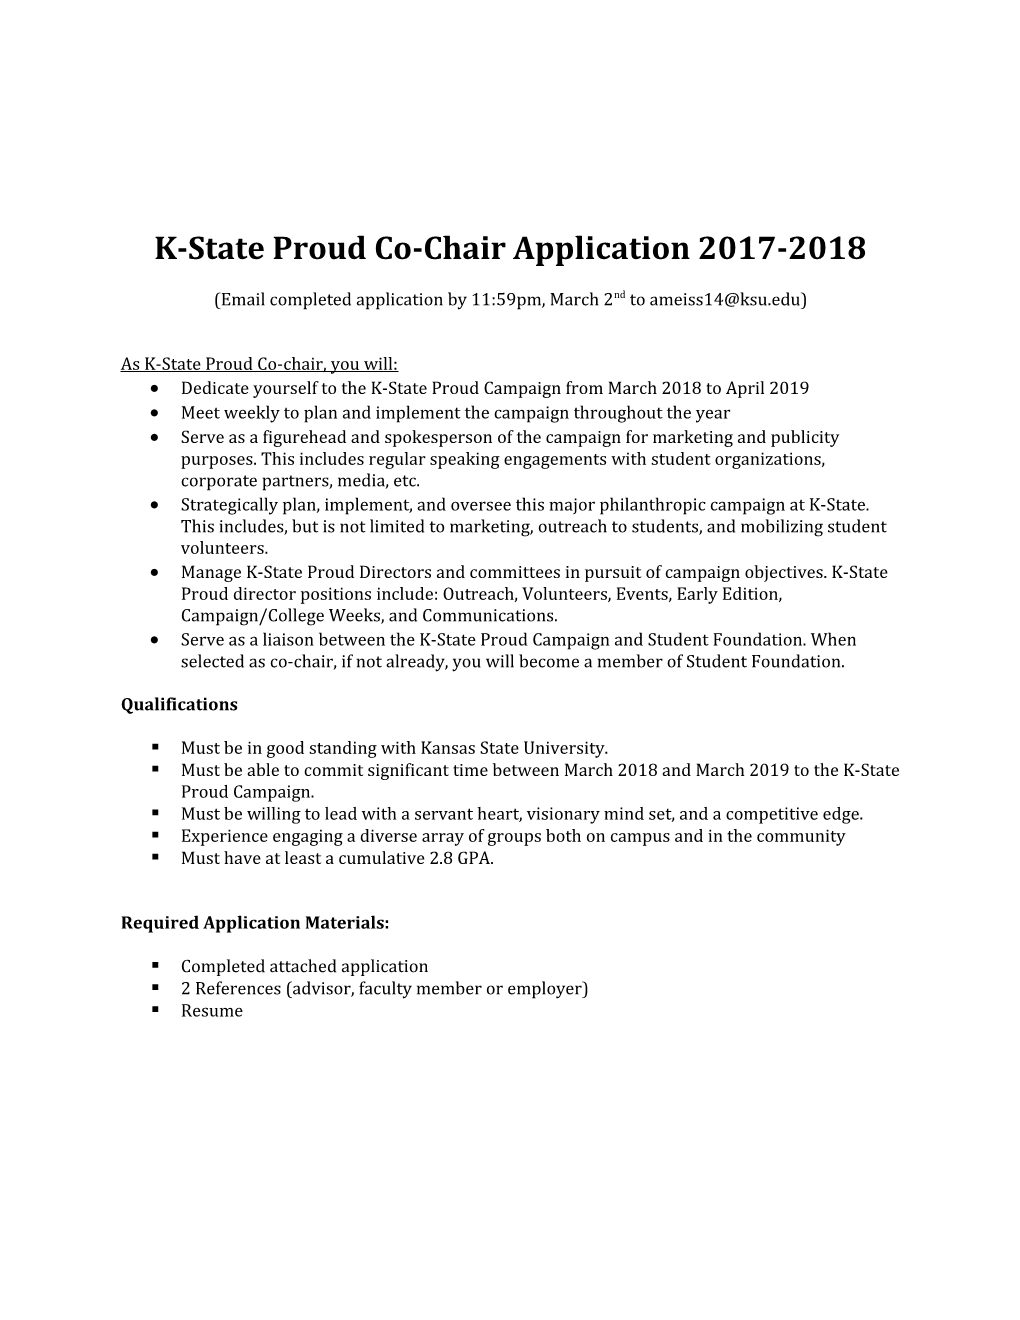 K-State Proud Co-Chair Application 2017-2018